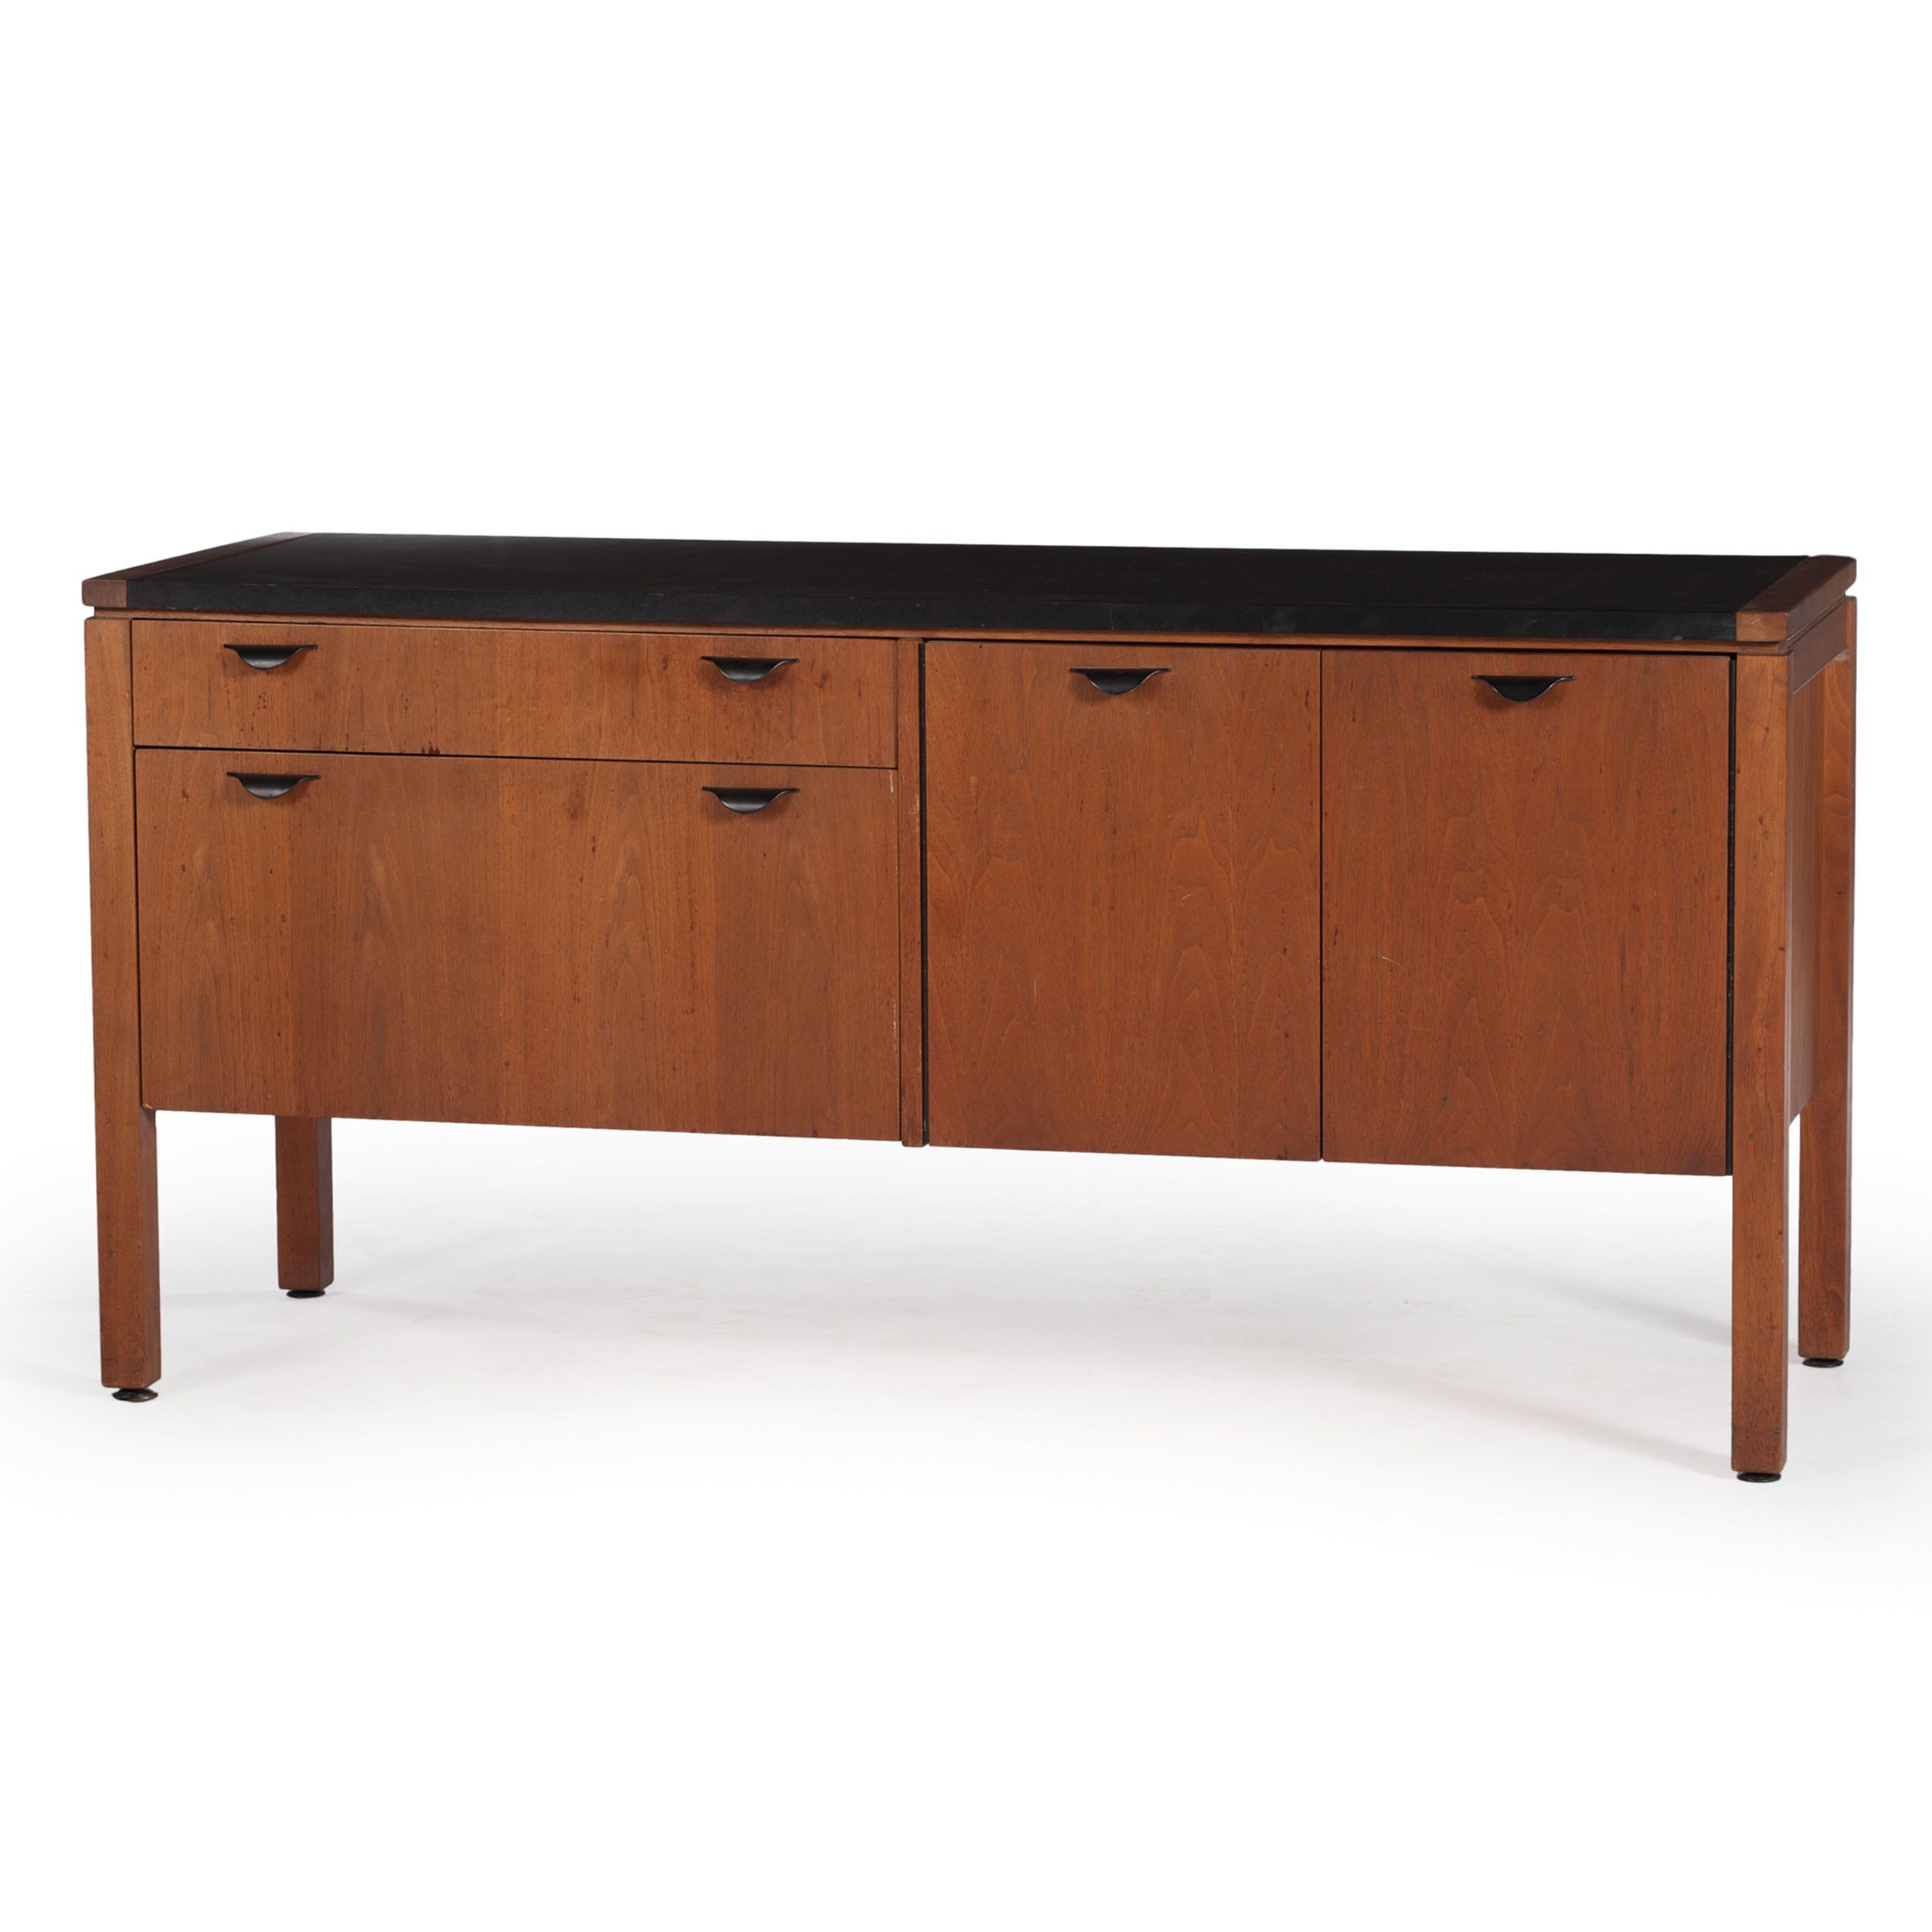 Mid Century Modern Sideboard With Black Laminate Top | Cowan's Auction With Most Popular Cleveland Sideboard (View 16 of 20)